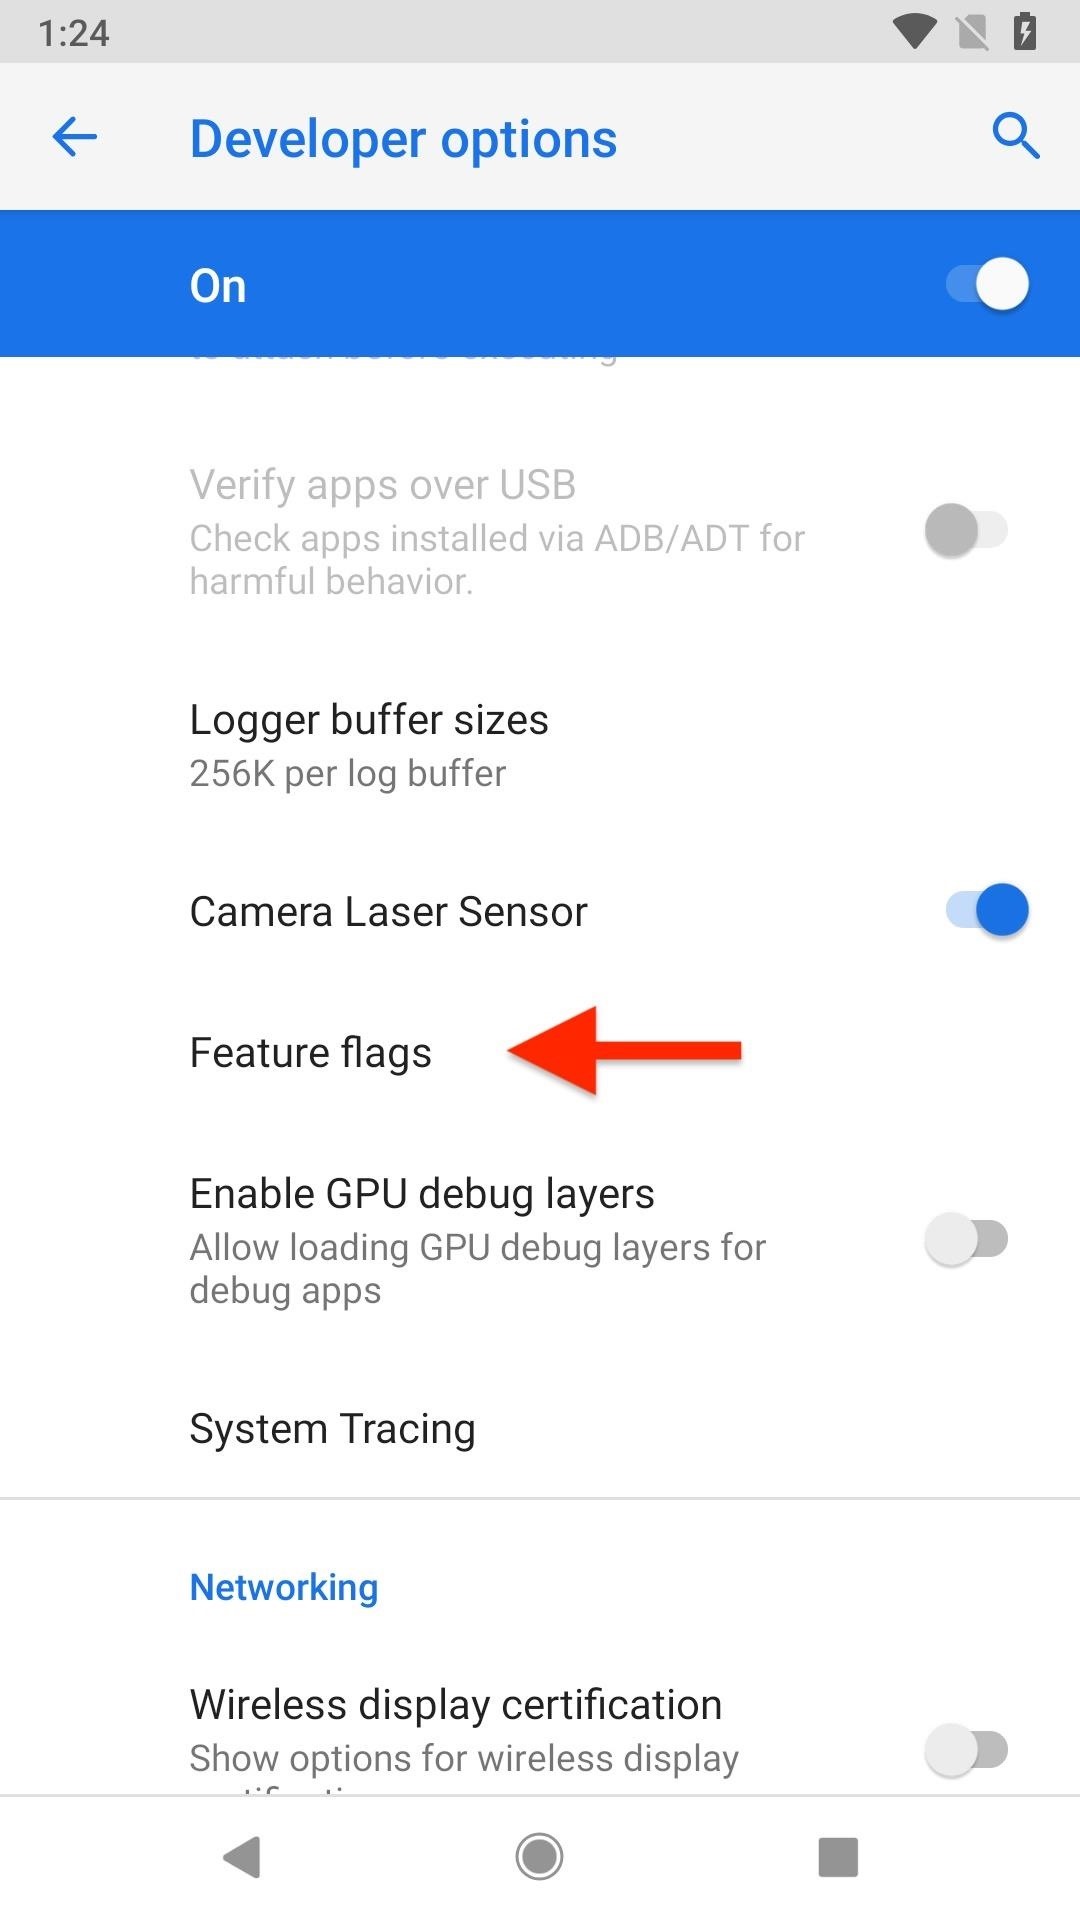 How to Unlock Android 9.0 Pie's New 'Feature Flags' Menu to Modify System Settings